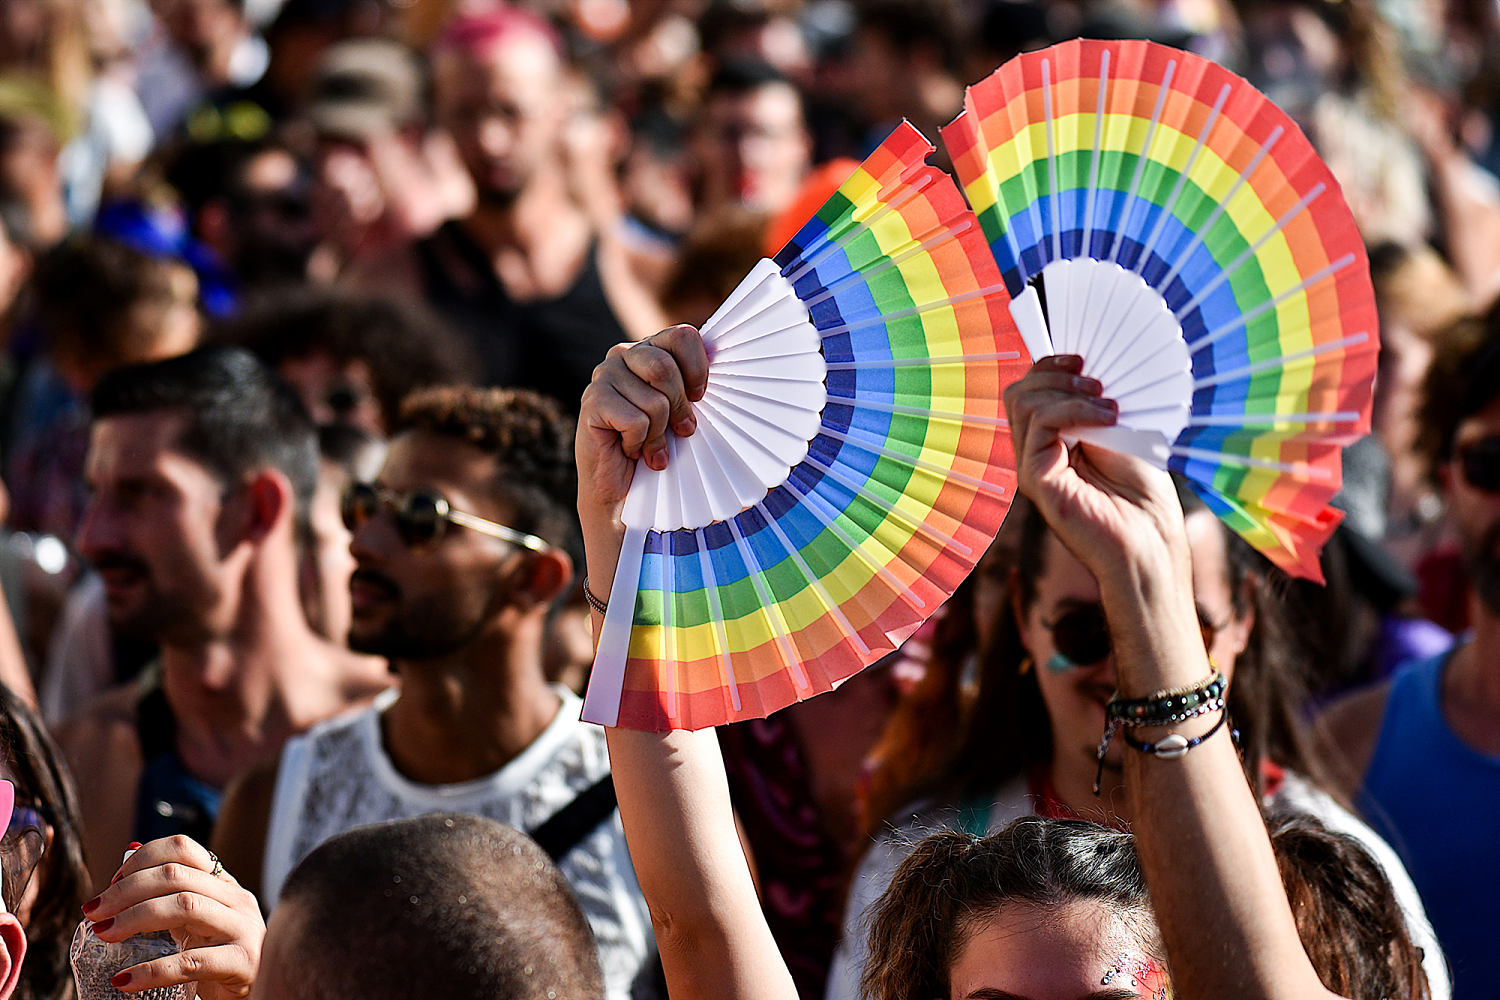 LGBTQ people in the EU face less discrimination but more violence, survey finds